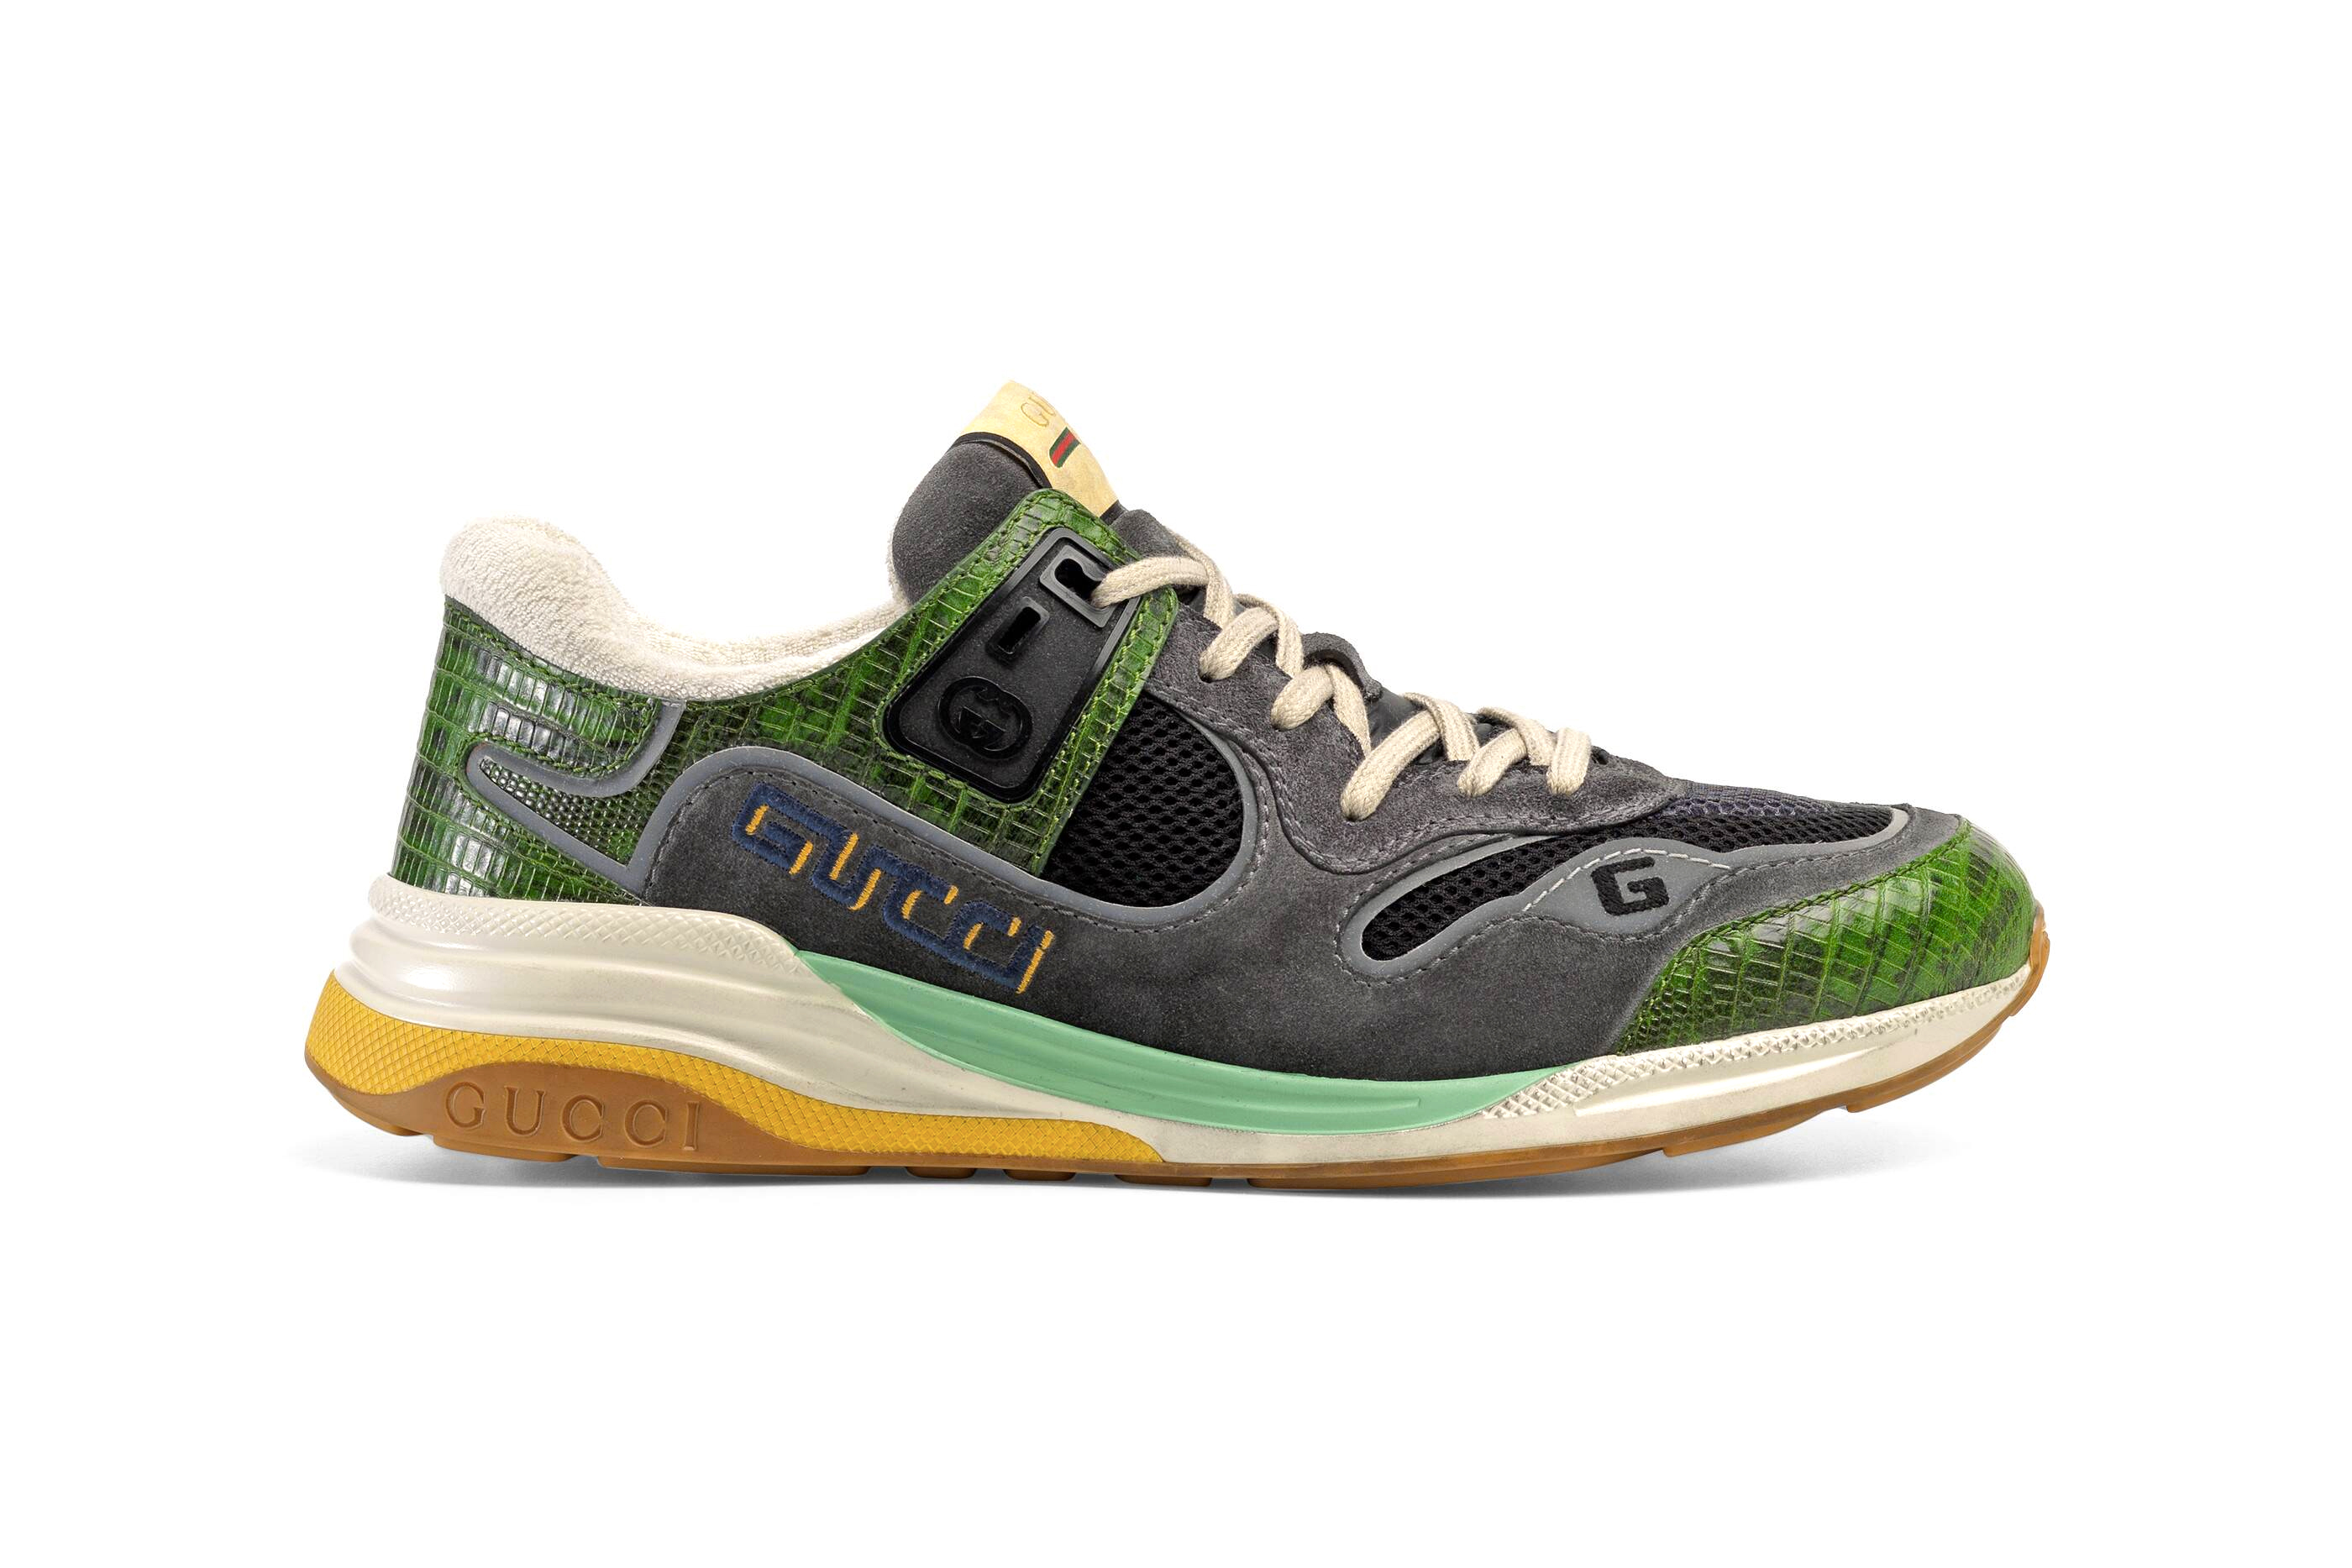 Gucci UltraPace Mixed-Materials Sneaker Green pattern multi leather hand painted sole vintage logo interlocking G detail footwear shoes designer footwear